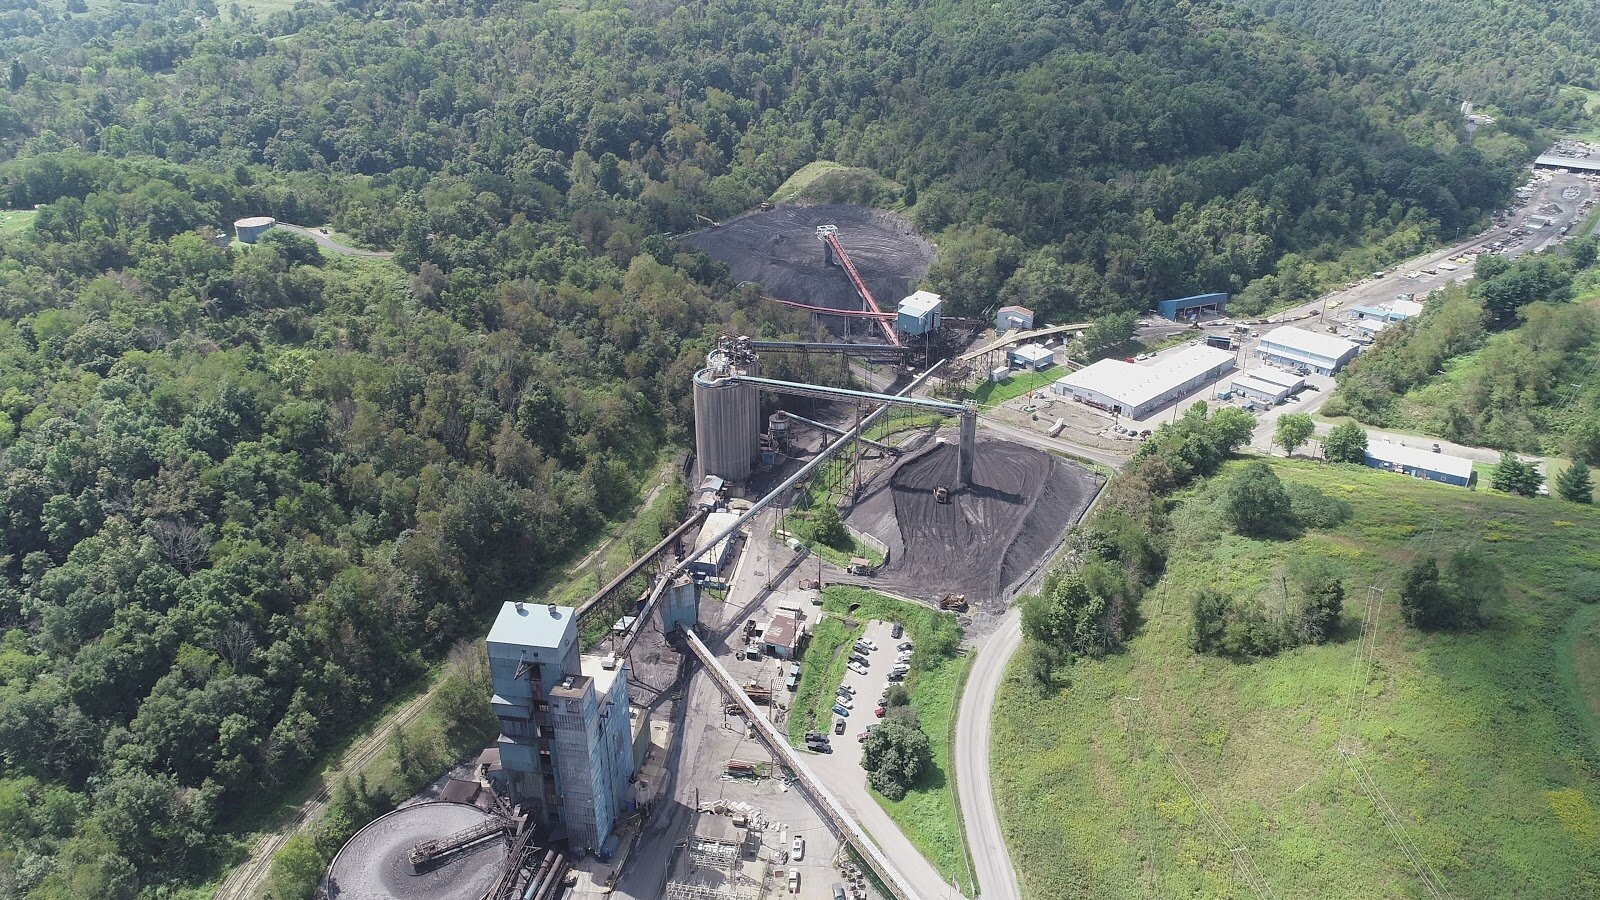 In February, Contura Energy, the owners of the Cumberland Mining Complex near Waynesburg, contemplated its need for a $60-million coal-refuse impoundment in order to continue production, and the owners cited current finances and market conditions as being a major issue of concern. In June of 2020 Contura announced that it is actively marketing the mine and that it employs roughly 700 workers. Continue reading Nick's blog  here .